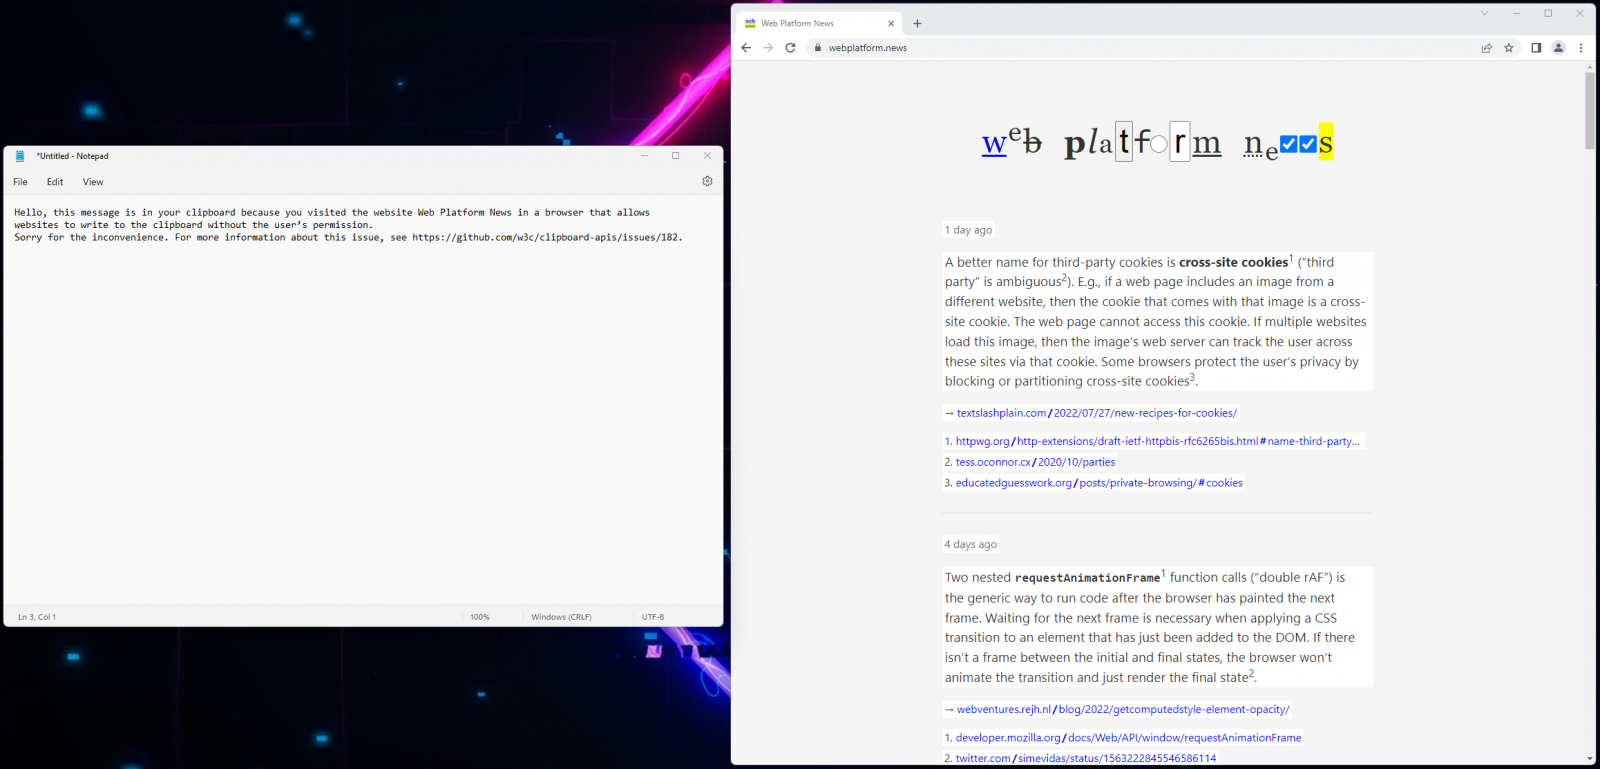 Clipboard overwritten when visiting a web page in Chrome